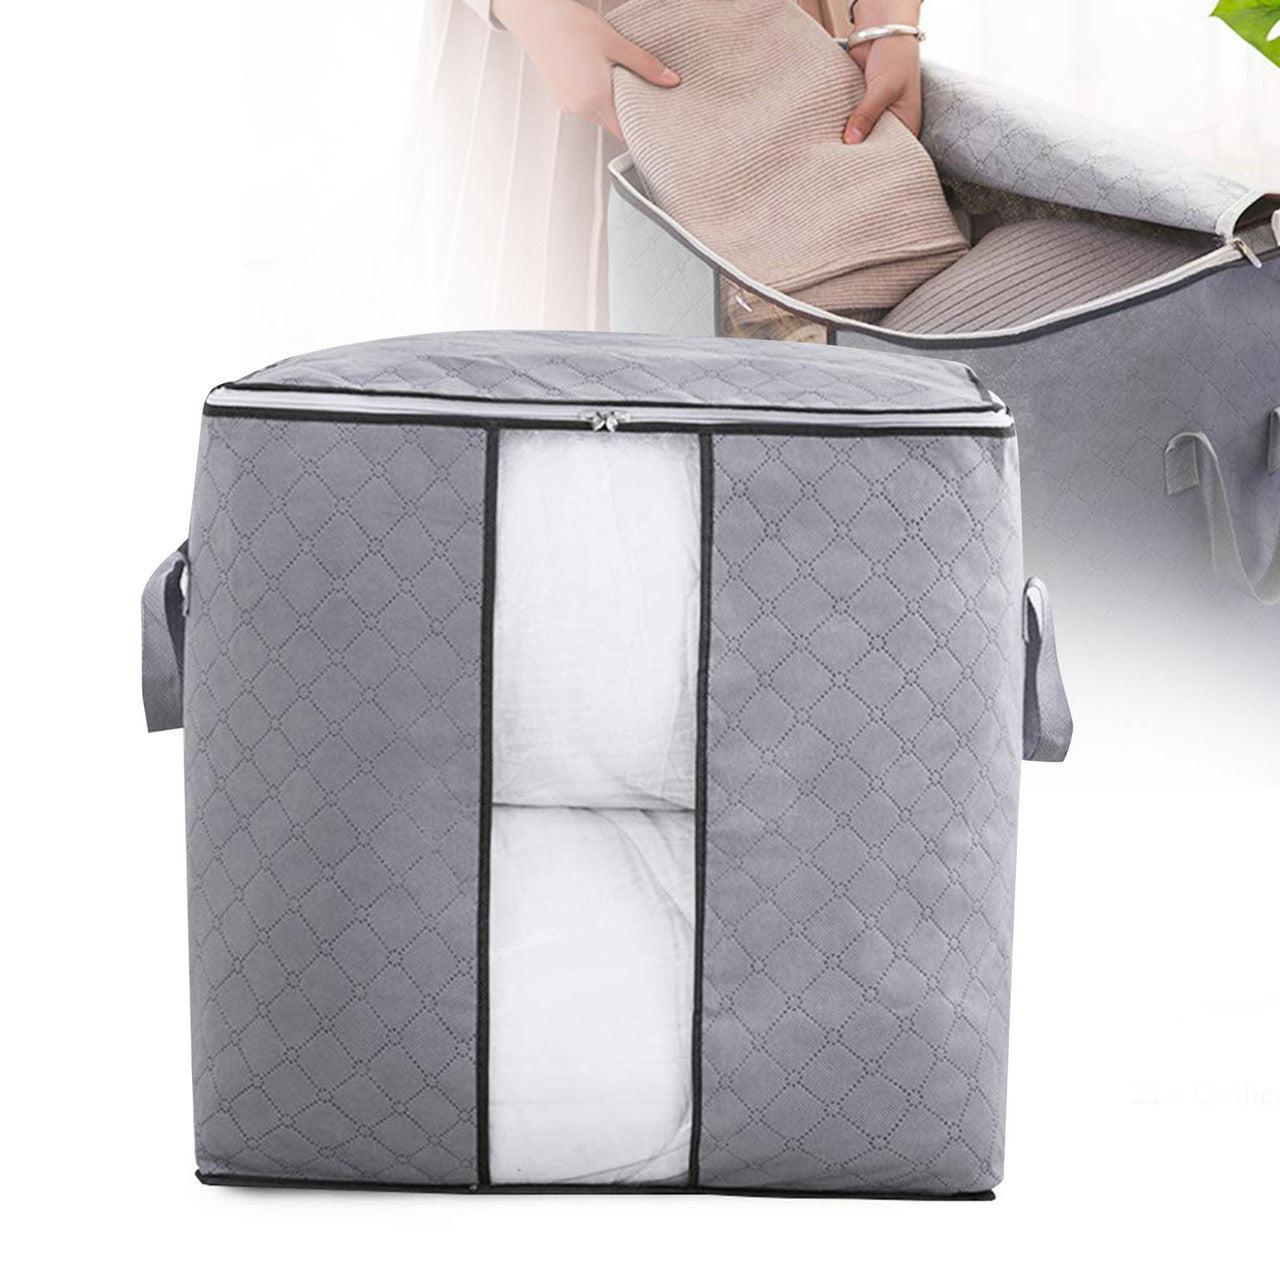 Foldable Storage Bag Organizers,Waterproof Anti-Mold Moisture Proof Clothes Storage Container Zipper Bag with Clear Window Carry Handles for Blanket Comforter Bedding